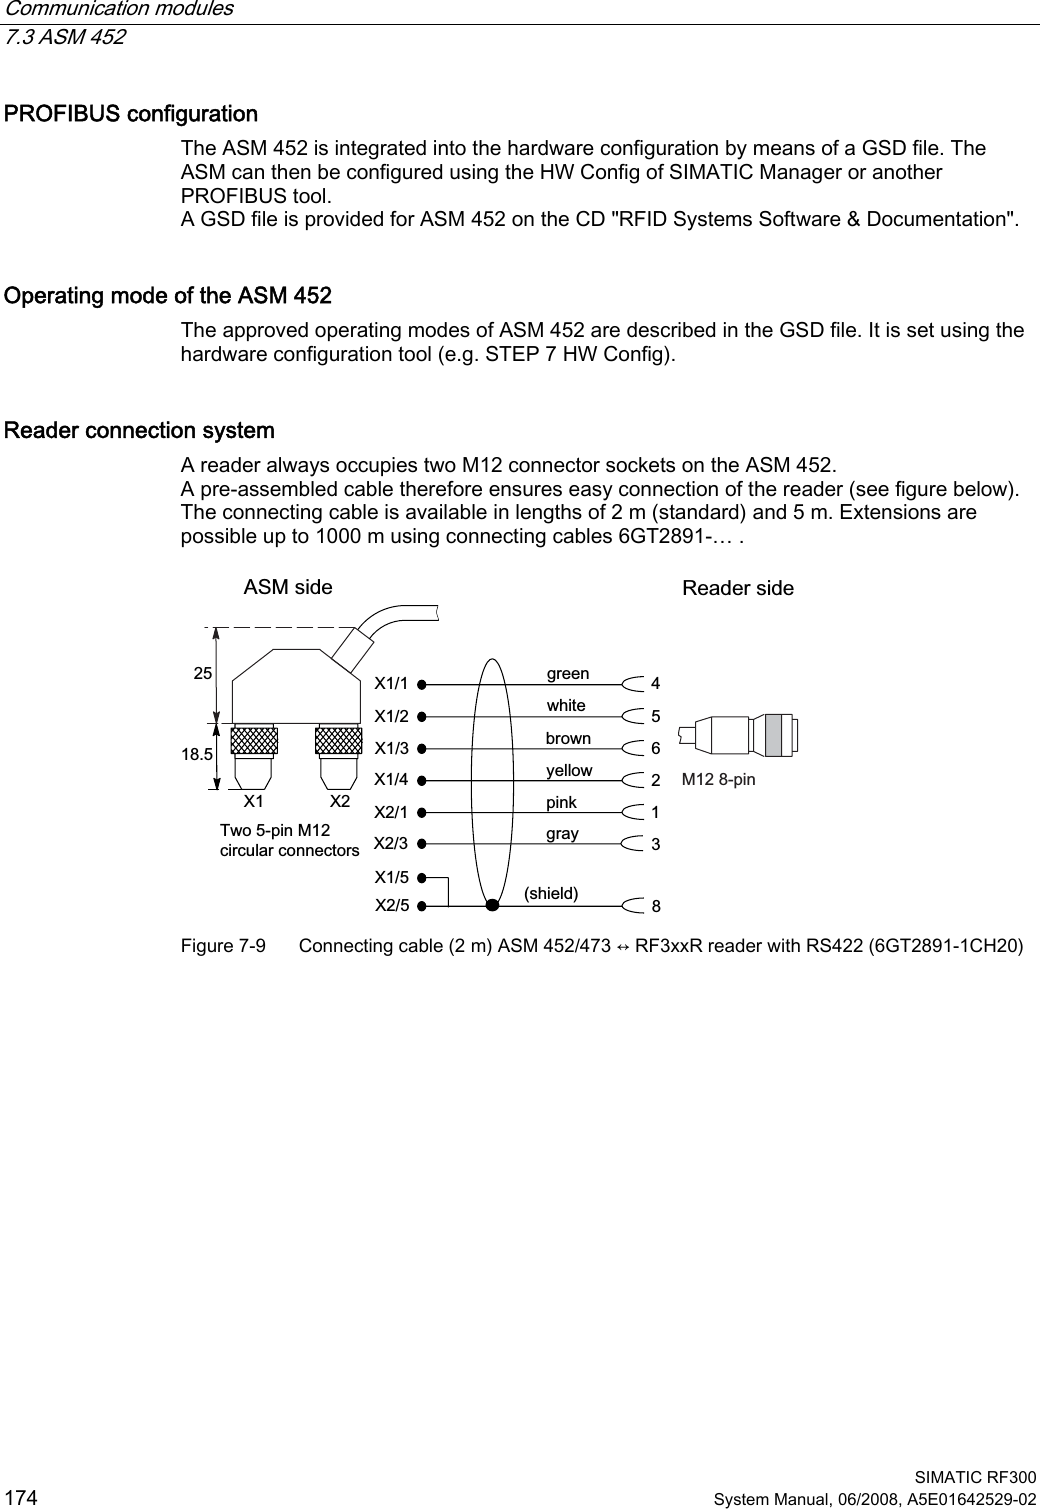 Communication modules   7.3 ASM 452  SIMATIC RF300 174  System Manual, 06/2008, A5E01642529-02 PROFIBUS configuration The ASM 452 is integrated into the hardware configuration by means of a GSD file. The ASM can then be configured using the HW Config of SIMATIC Manager or another PROFIBUS tool. A GSD file is provided for ASM 452 on the CD &quot;RFID Systems Software &amp; Documentation&quot;. Operating mode of the ASM 452 The approved operating modes of ASM 452 are described in the GSD file. It is set using the hardware configuration tool (e.g. STEP 7 HW Config). Reader connection system A reader always occupies two M12 connector sockets on the ASM 452. A pre-assembled cable therefore ensures easy connection of the reader (see figure below). The connecting cable is available in lengths of 2 m (standard) and 5 m. Extensions are possible up to 1000 m using connecting cables 6GT2891-… .  JUD\JUHHQZKLWHEURZQ\HOORZSLQNVKLHOG7ZRSLQ0FLUFXODUFRQQHFWRUV$60VLGH 5HDGHUVLGH0SLQ ;;;;;;; ; ;; Figure 7-9  Connecting cable (2 m) ASM 452/473 ↔ RF3xxR reader with RS422 (6GT2891-1CH20)  